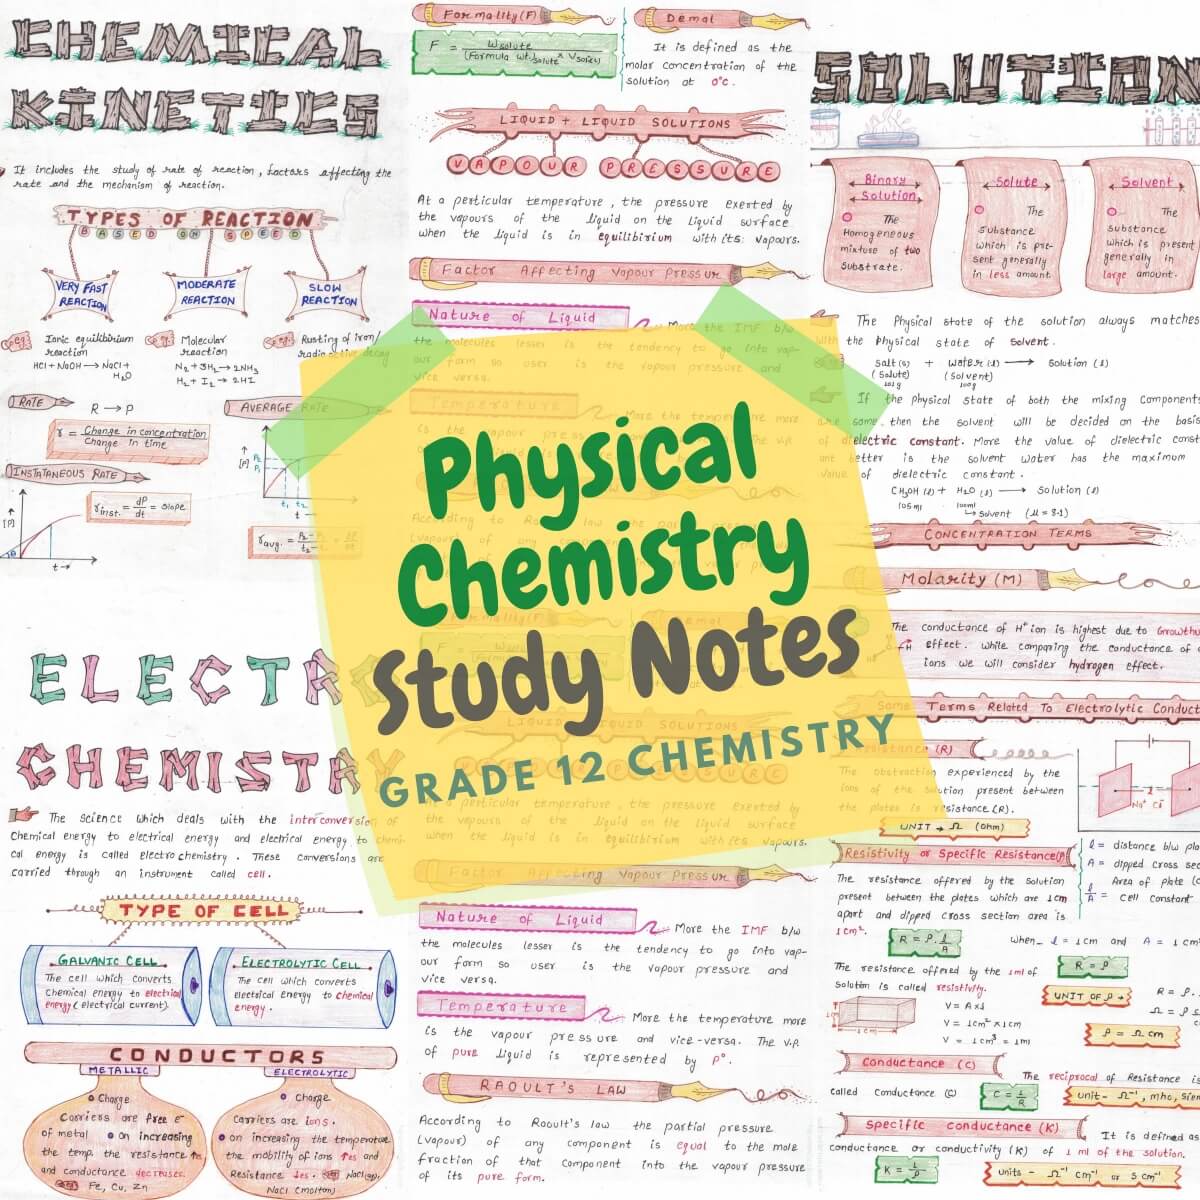 Physical chemistry grade class 12 handwrotten color notes